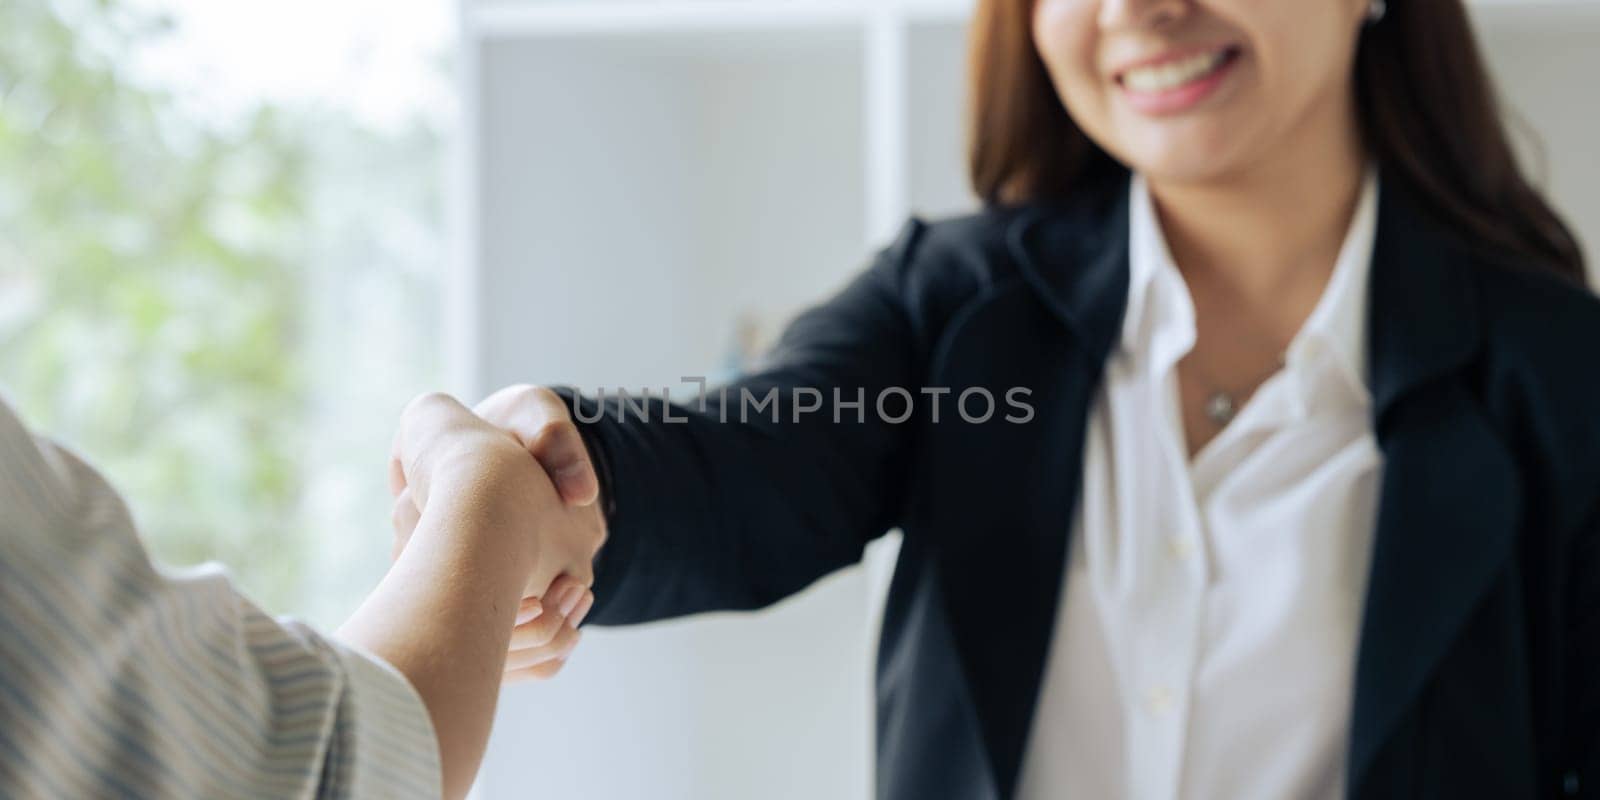 Two professional businesswoman executive leaders shaking hands at office meeting.